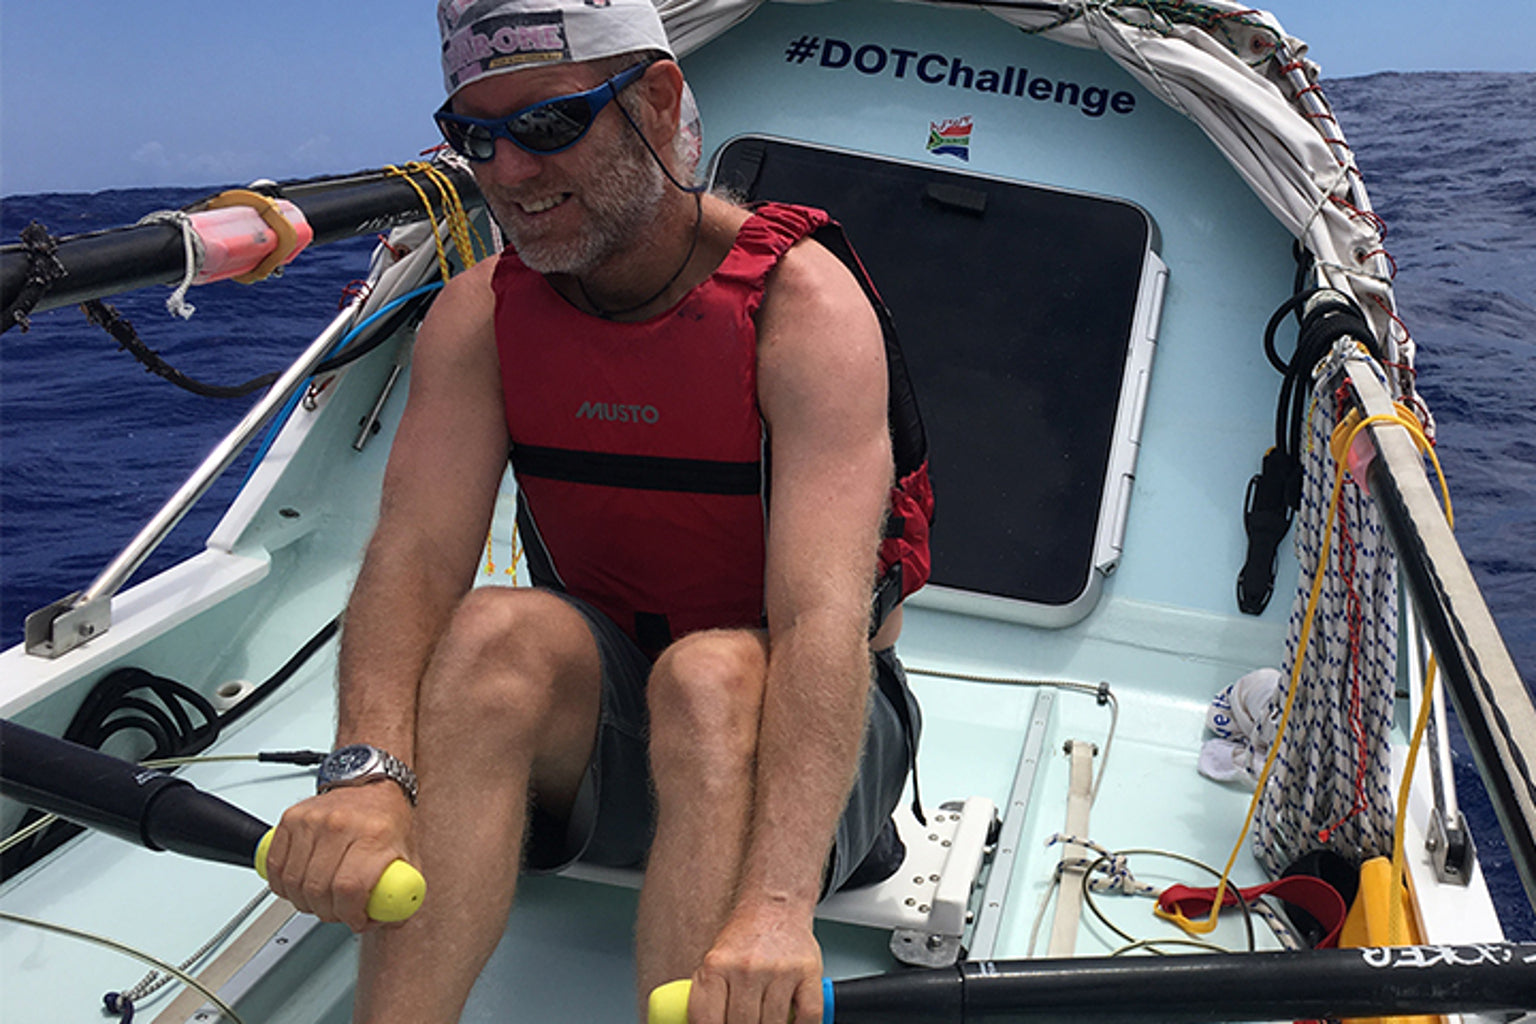 DO 1 THING – ROWING FROM CAPE TOWN TO RIO TO HELP SAVE THE PLANET